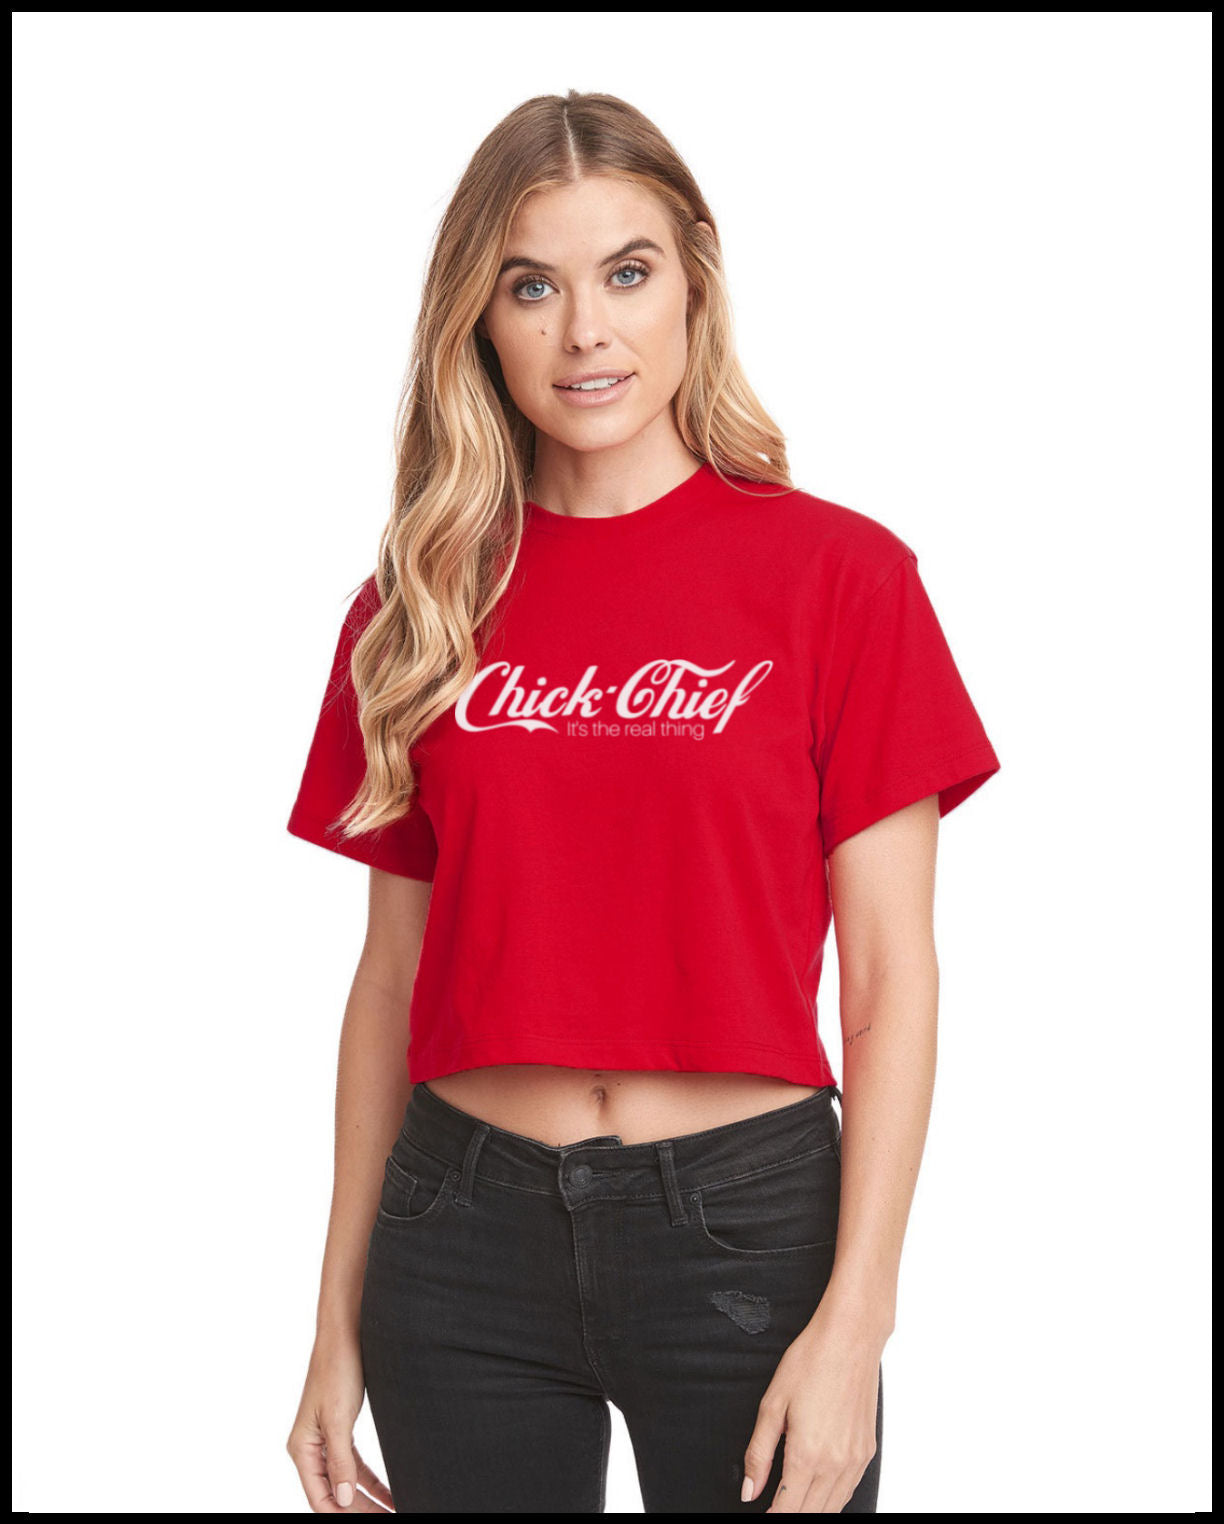 Chick Chief Real Thing Red T-Shirt